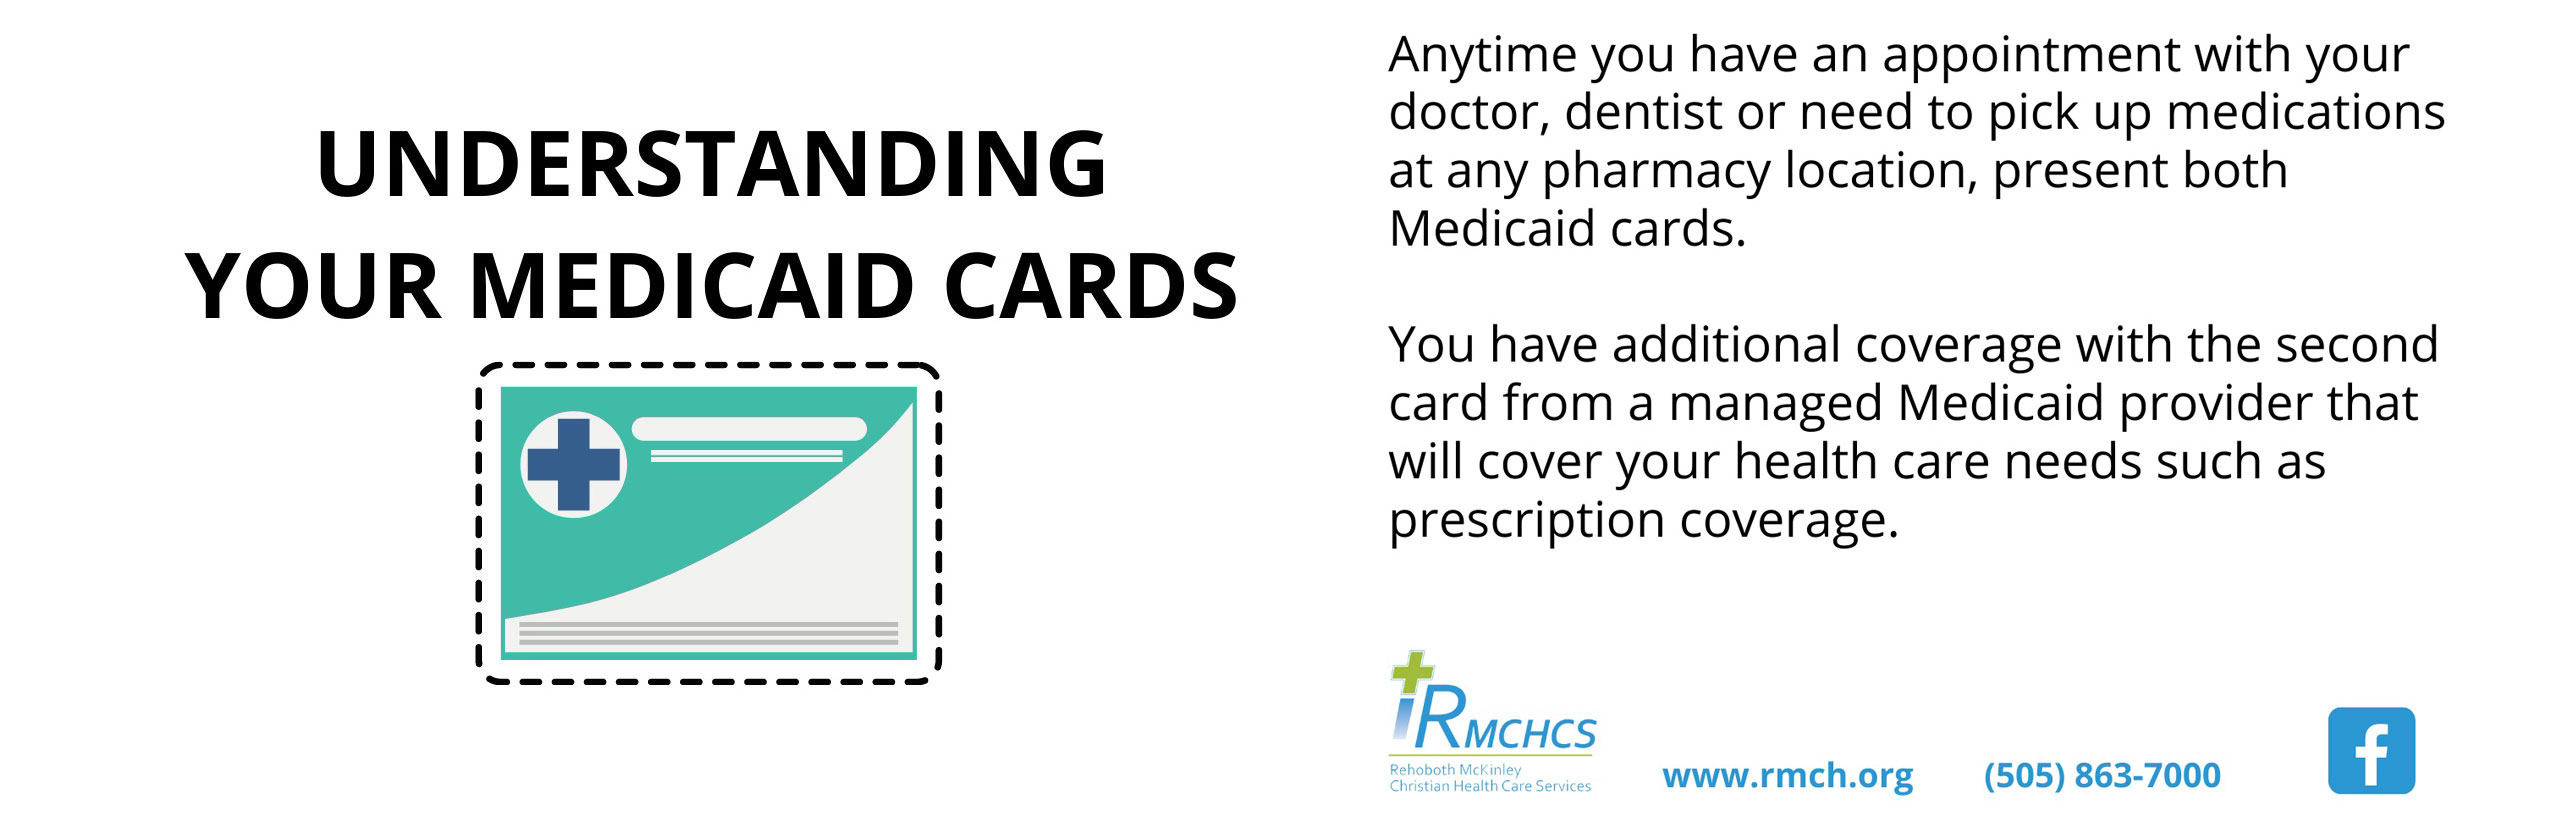 Banner graphic picture of a Medicaid Card. Banner says:

UNDERSTANDING YOUR MEDICAID CARDS

Anytime you have an appointment with your doctor, dentistm or need to pick up medications at any pharmacy location, present both Medicaid cards.

You have additonal coverage with the second card from a managed Medicaid provider will cover your health care needs such as prescription coverage

RMCHCS
Rehoboth McKinley Christian Health Care Services

www,rnch,org
(505) 863-7000

(facebook logo)